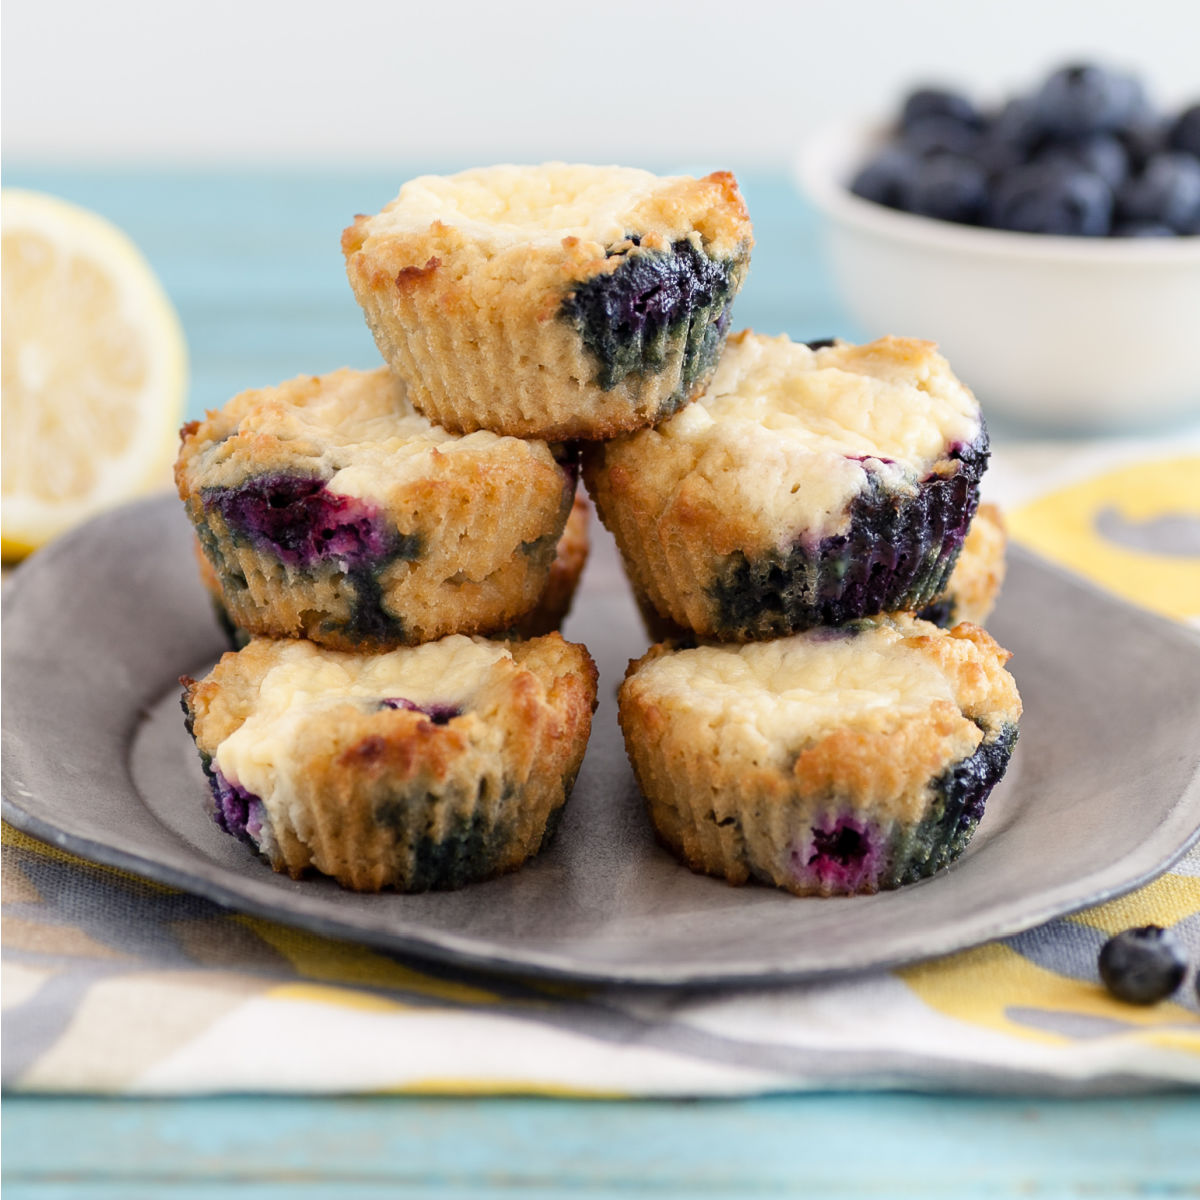 A pyramid of lemon blueberry cheese danish muffins with blueberries and lemon slices in the background.